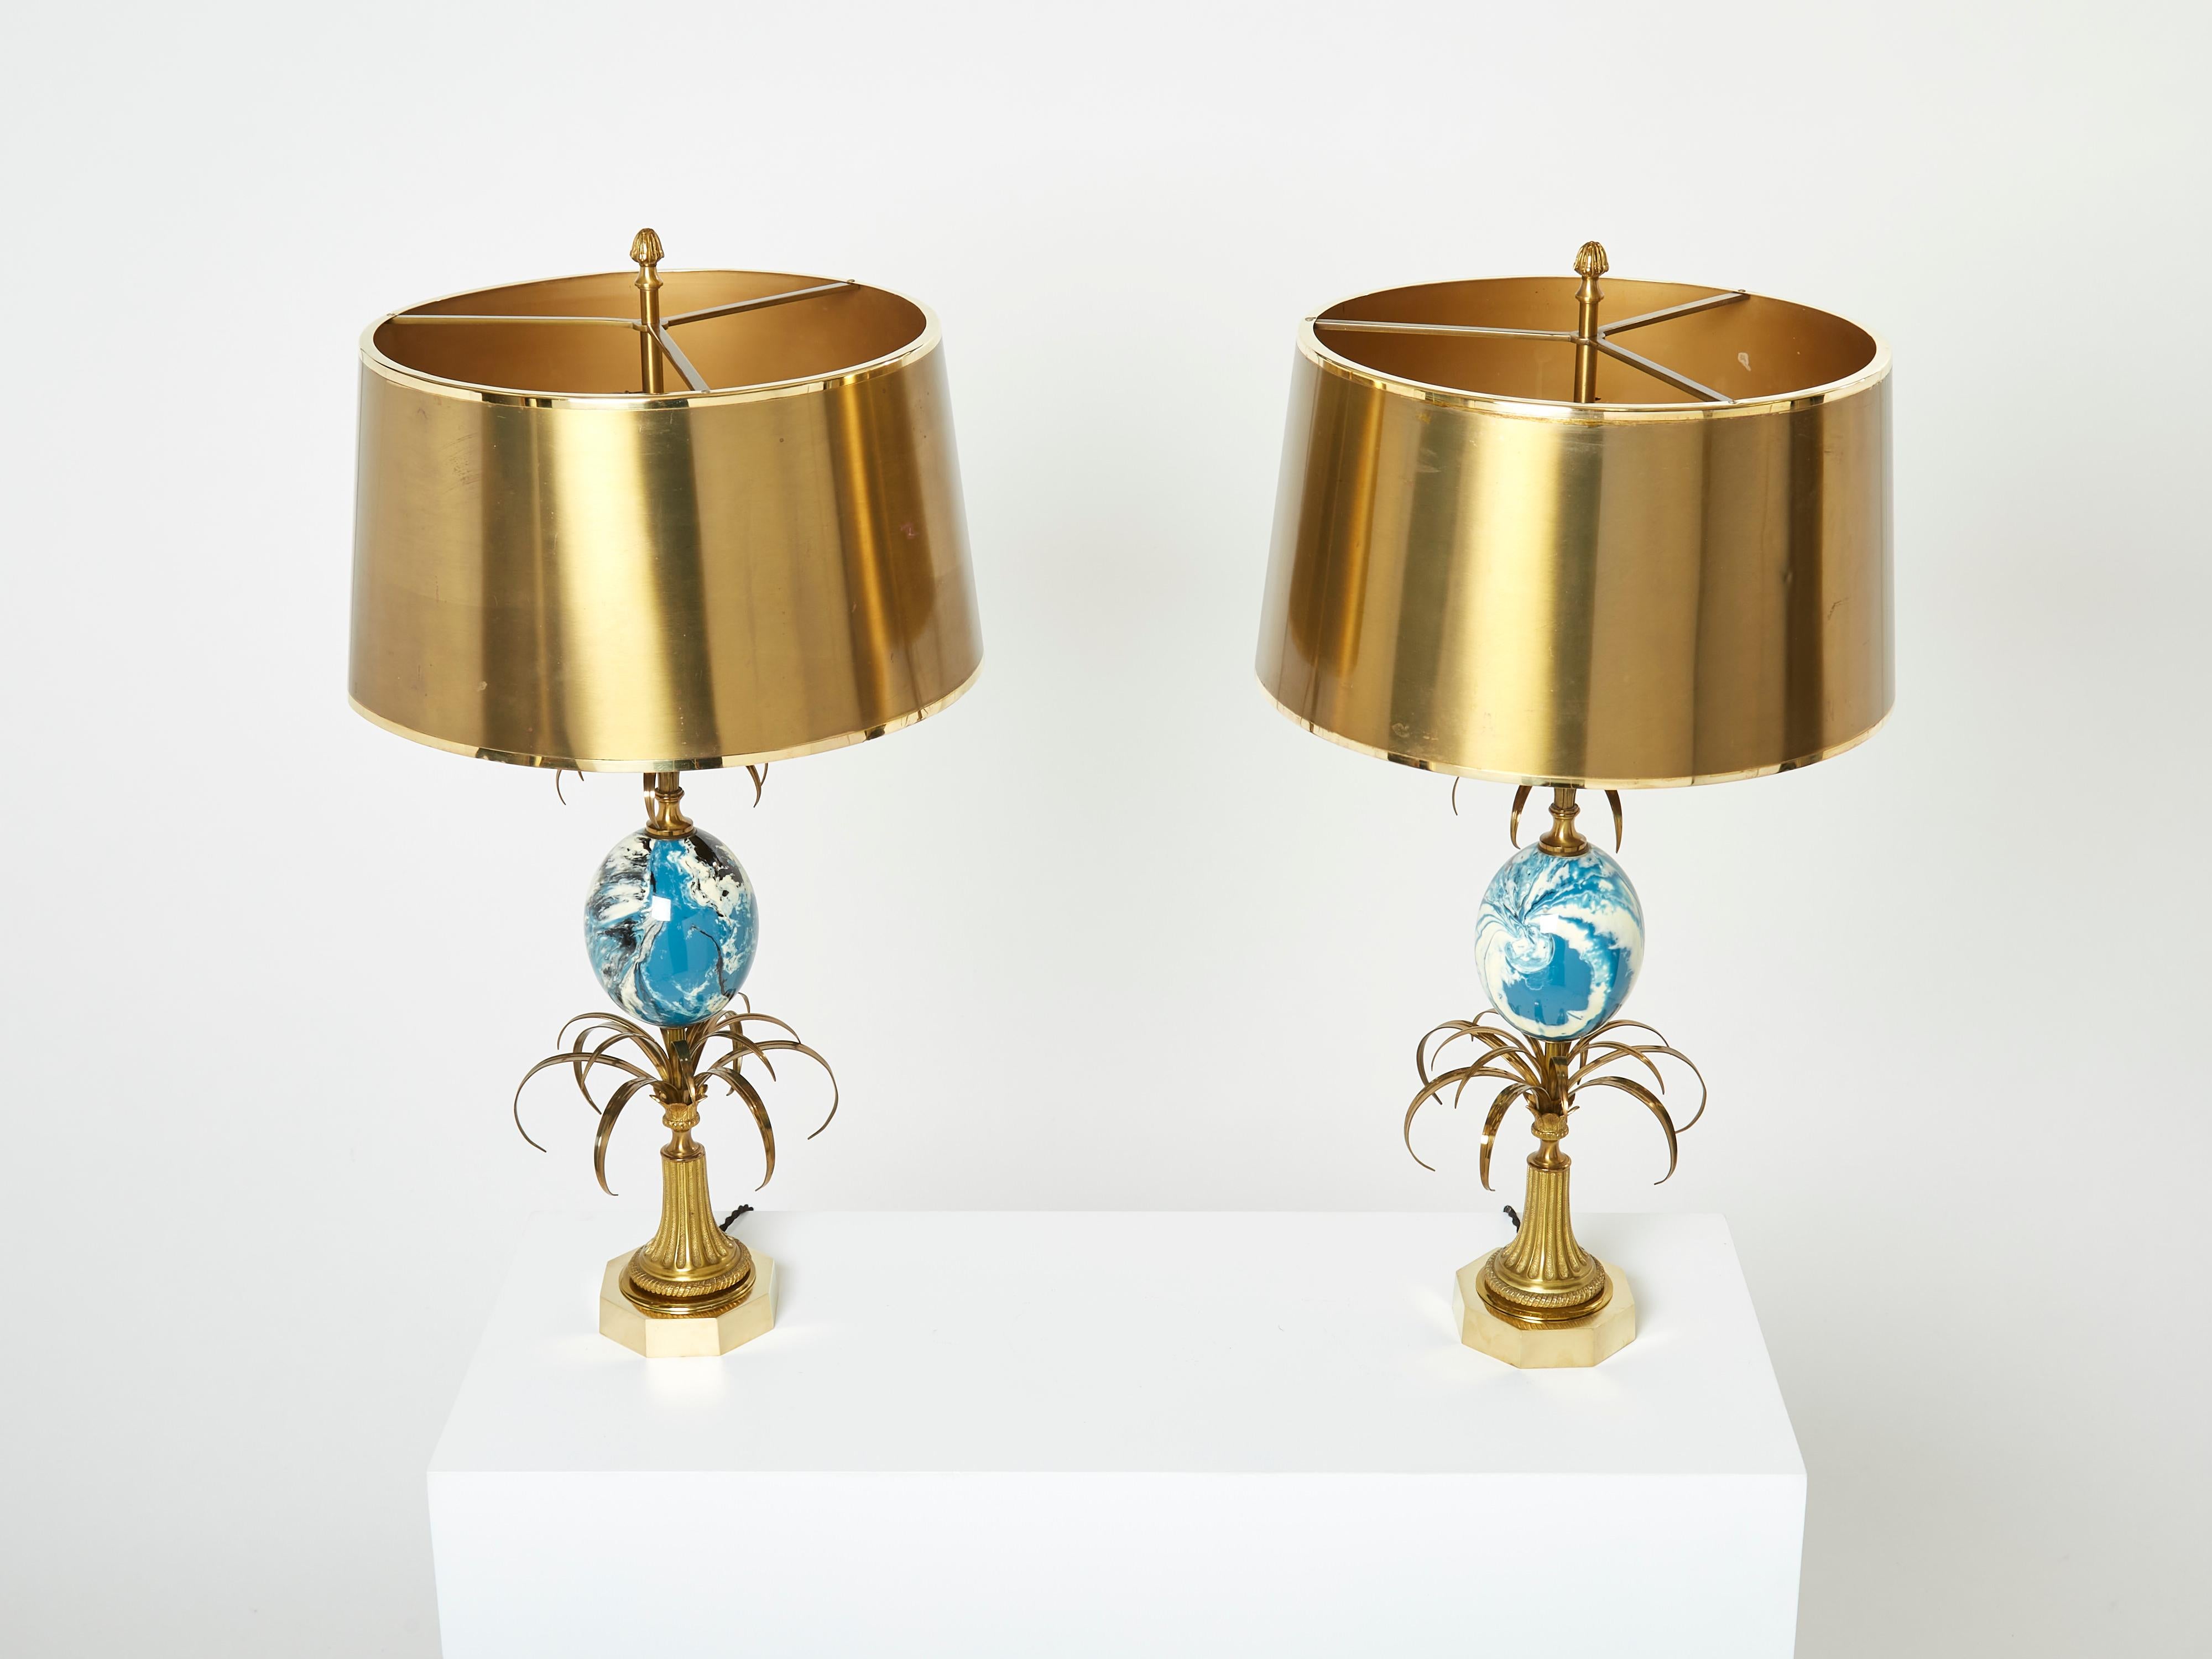 Vintage Maison Charles table lamps use nature as a muse, and this beautiful pair of lamps is a perfect example. They feature a beautiful brass base combined with a striking blue and white bakelite and resine ostrich egg in its center. They are